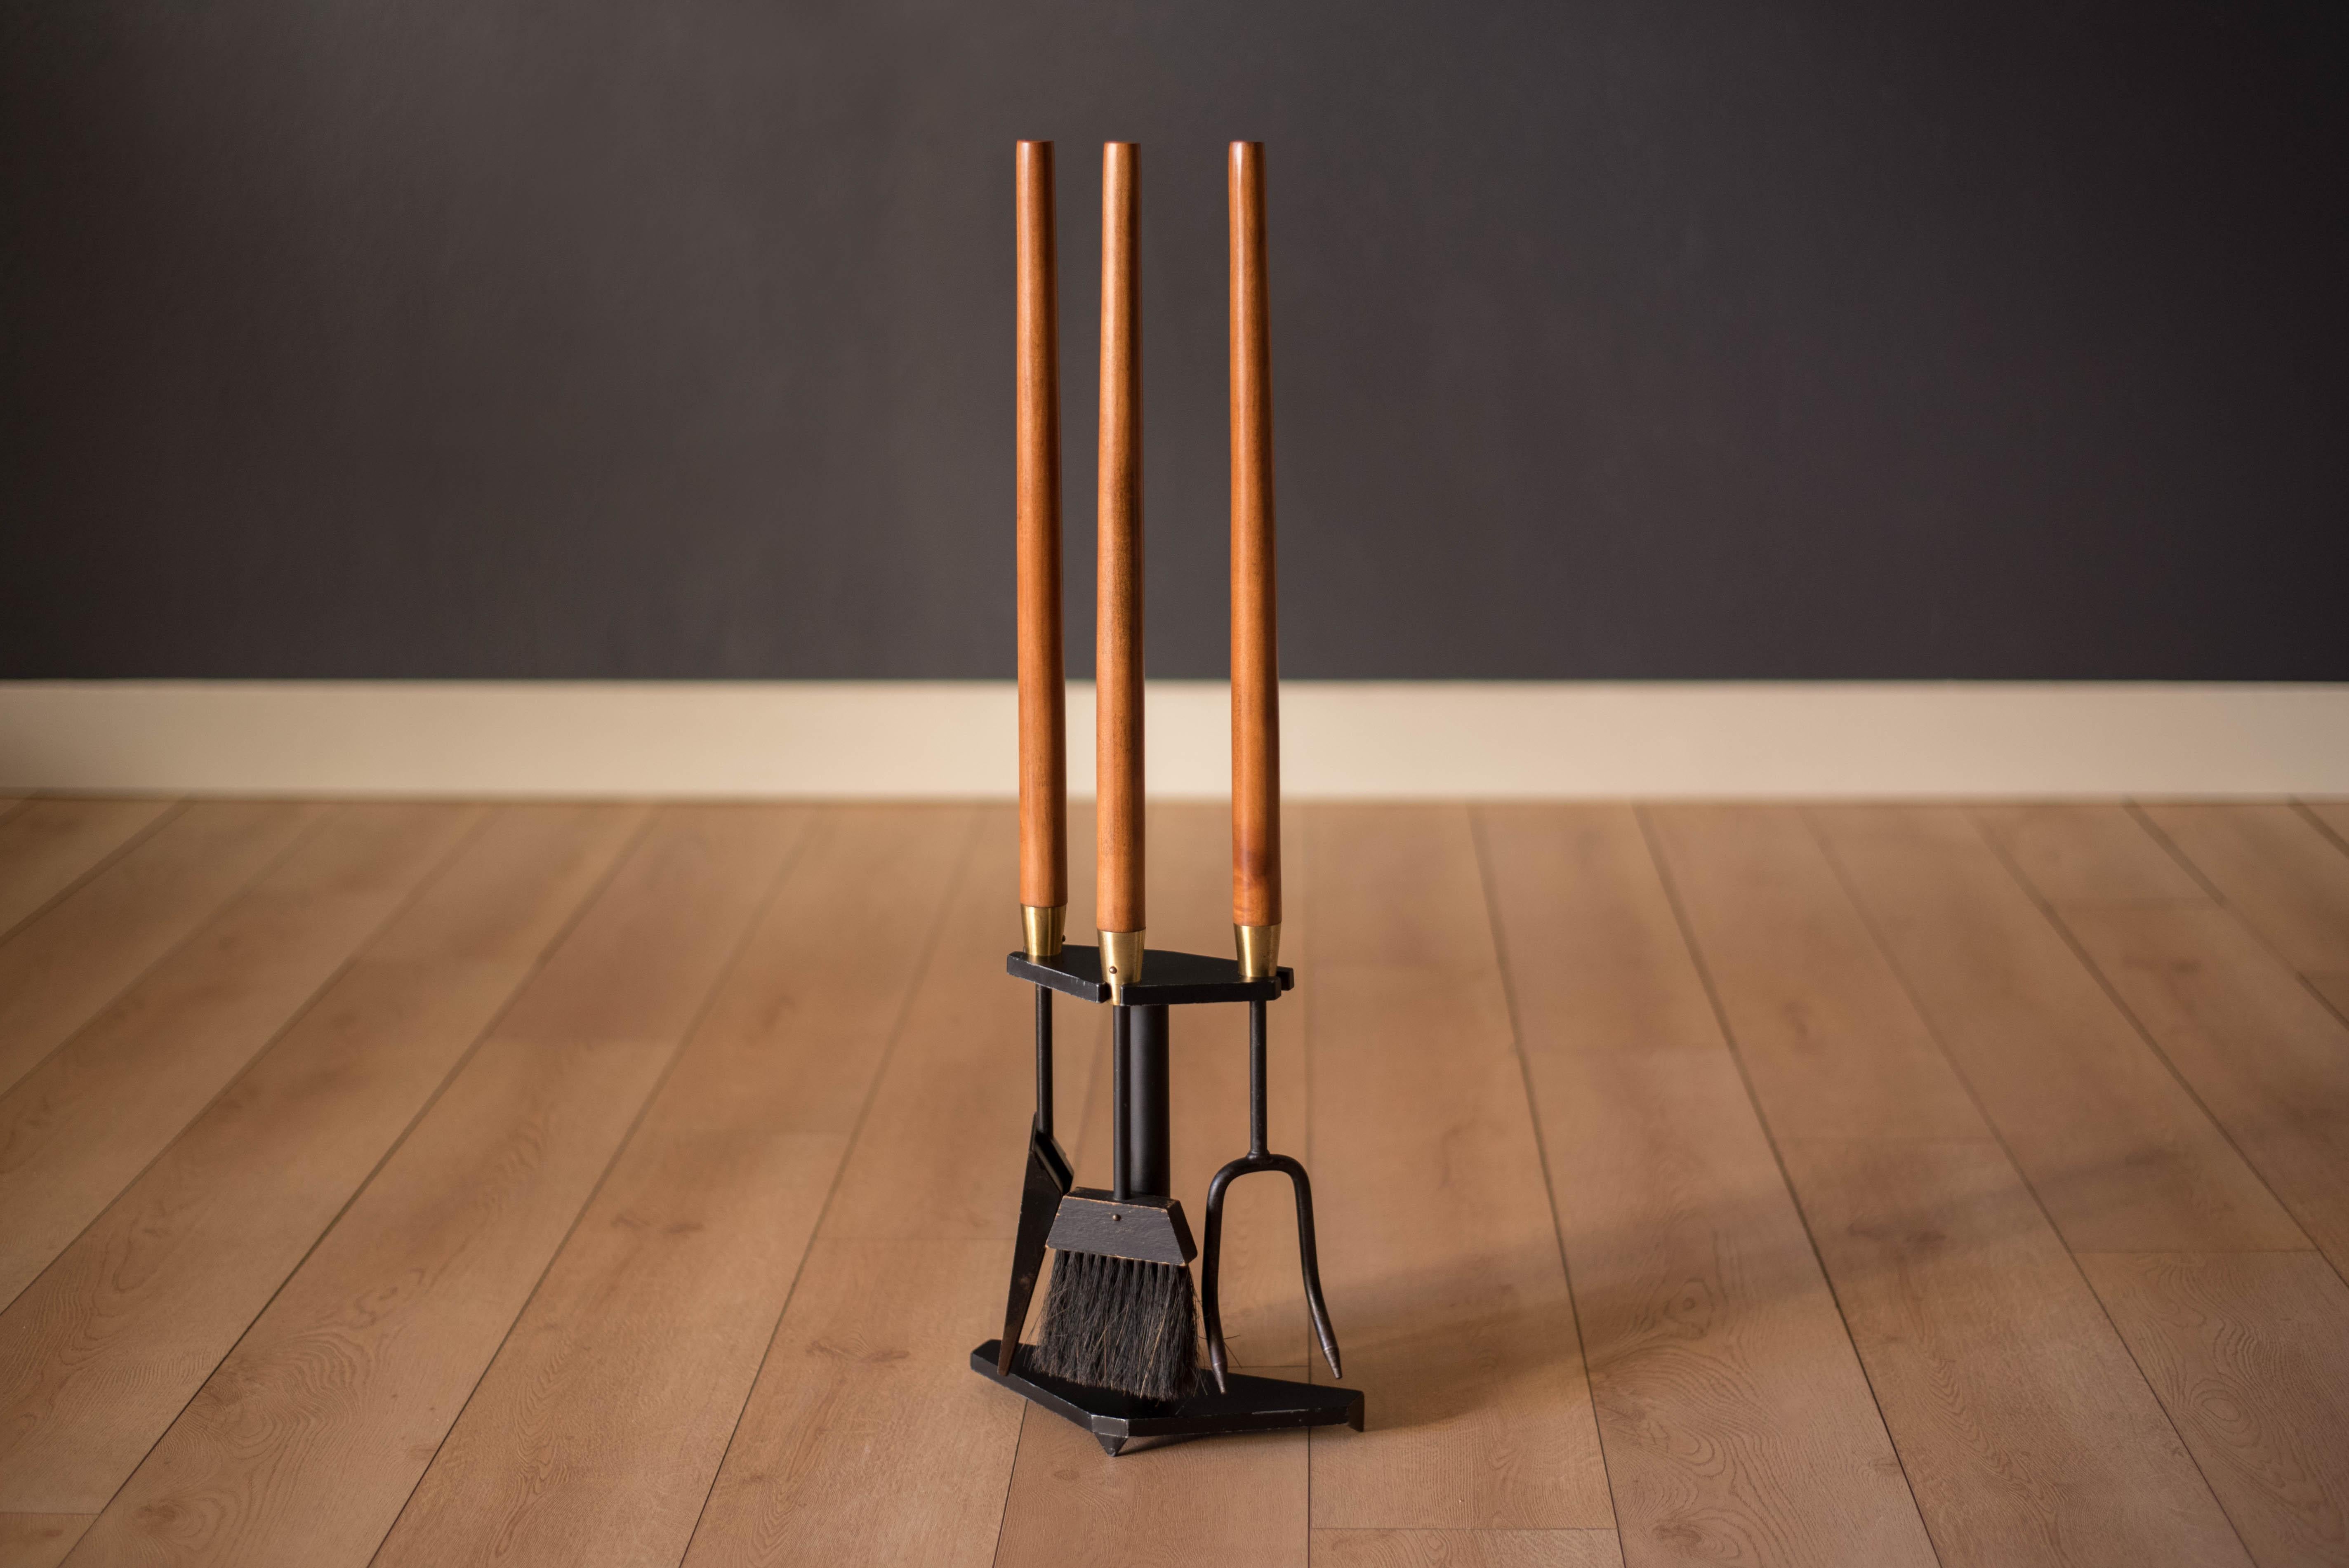 Vintage 3-piece fireplace tool set and floor stand by Seymour Manufacturing Co., circa 1960s. This set features sculpted wood handles with brass accents and a heavy cast iron base. Includes poker, shovel, brush, and floor stand.